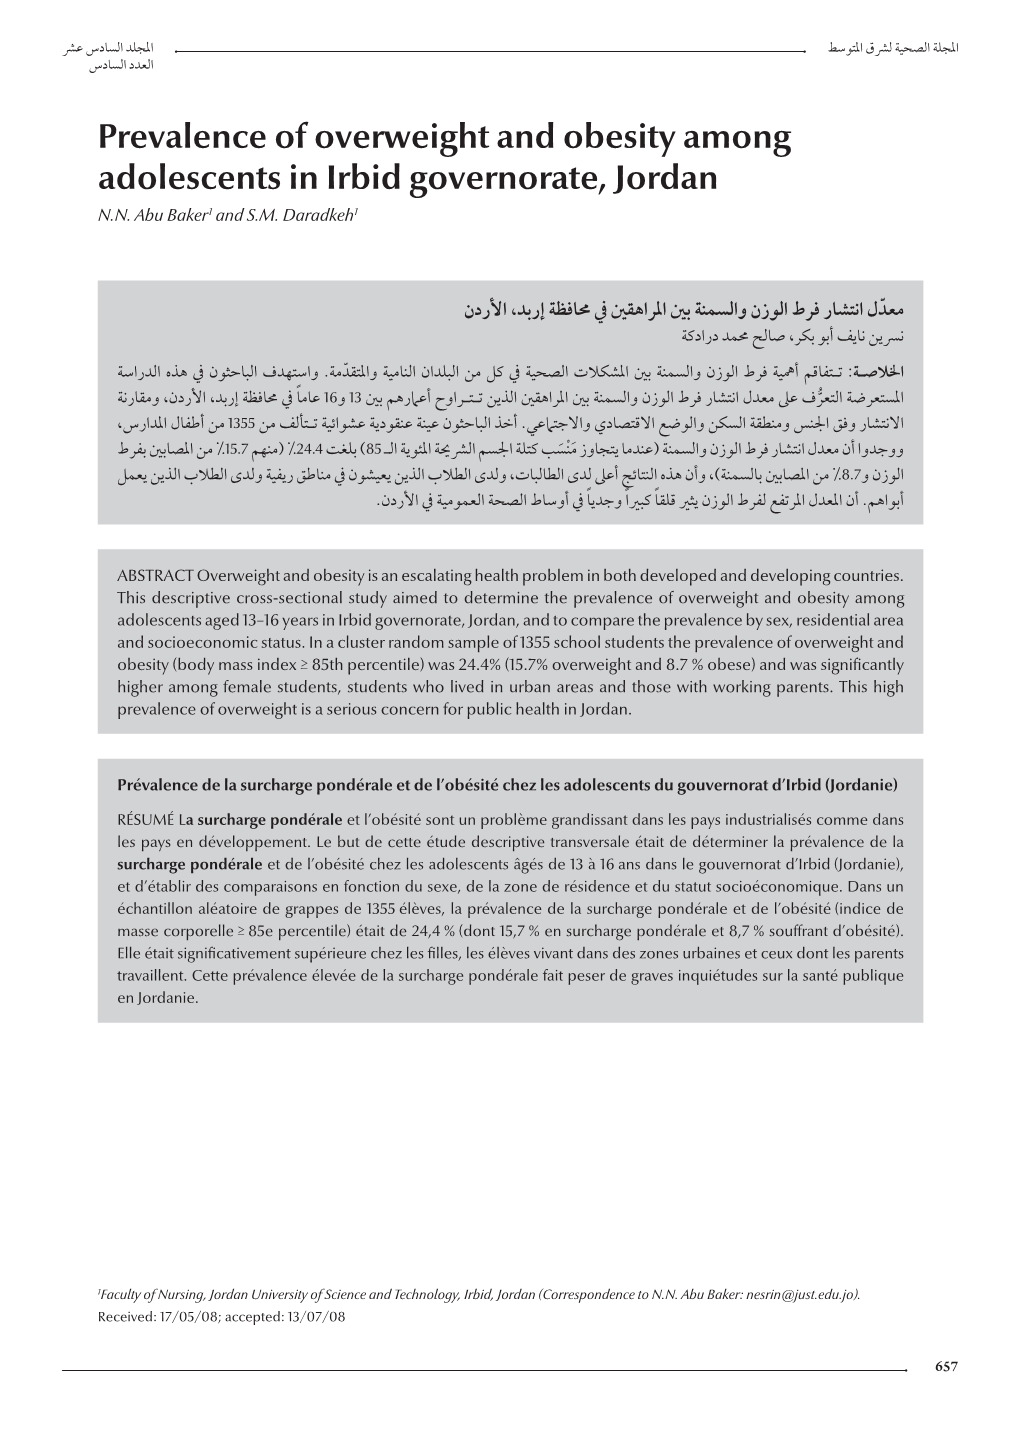 Prevalence of Overweight and Obesity Among Adolescents in Irbid Governorate, Jordan N.N